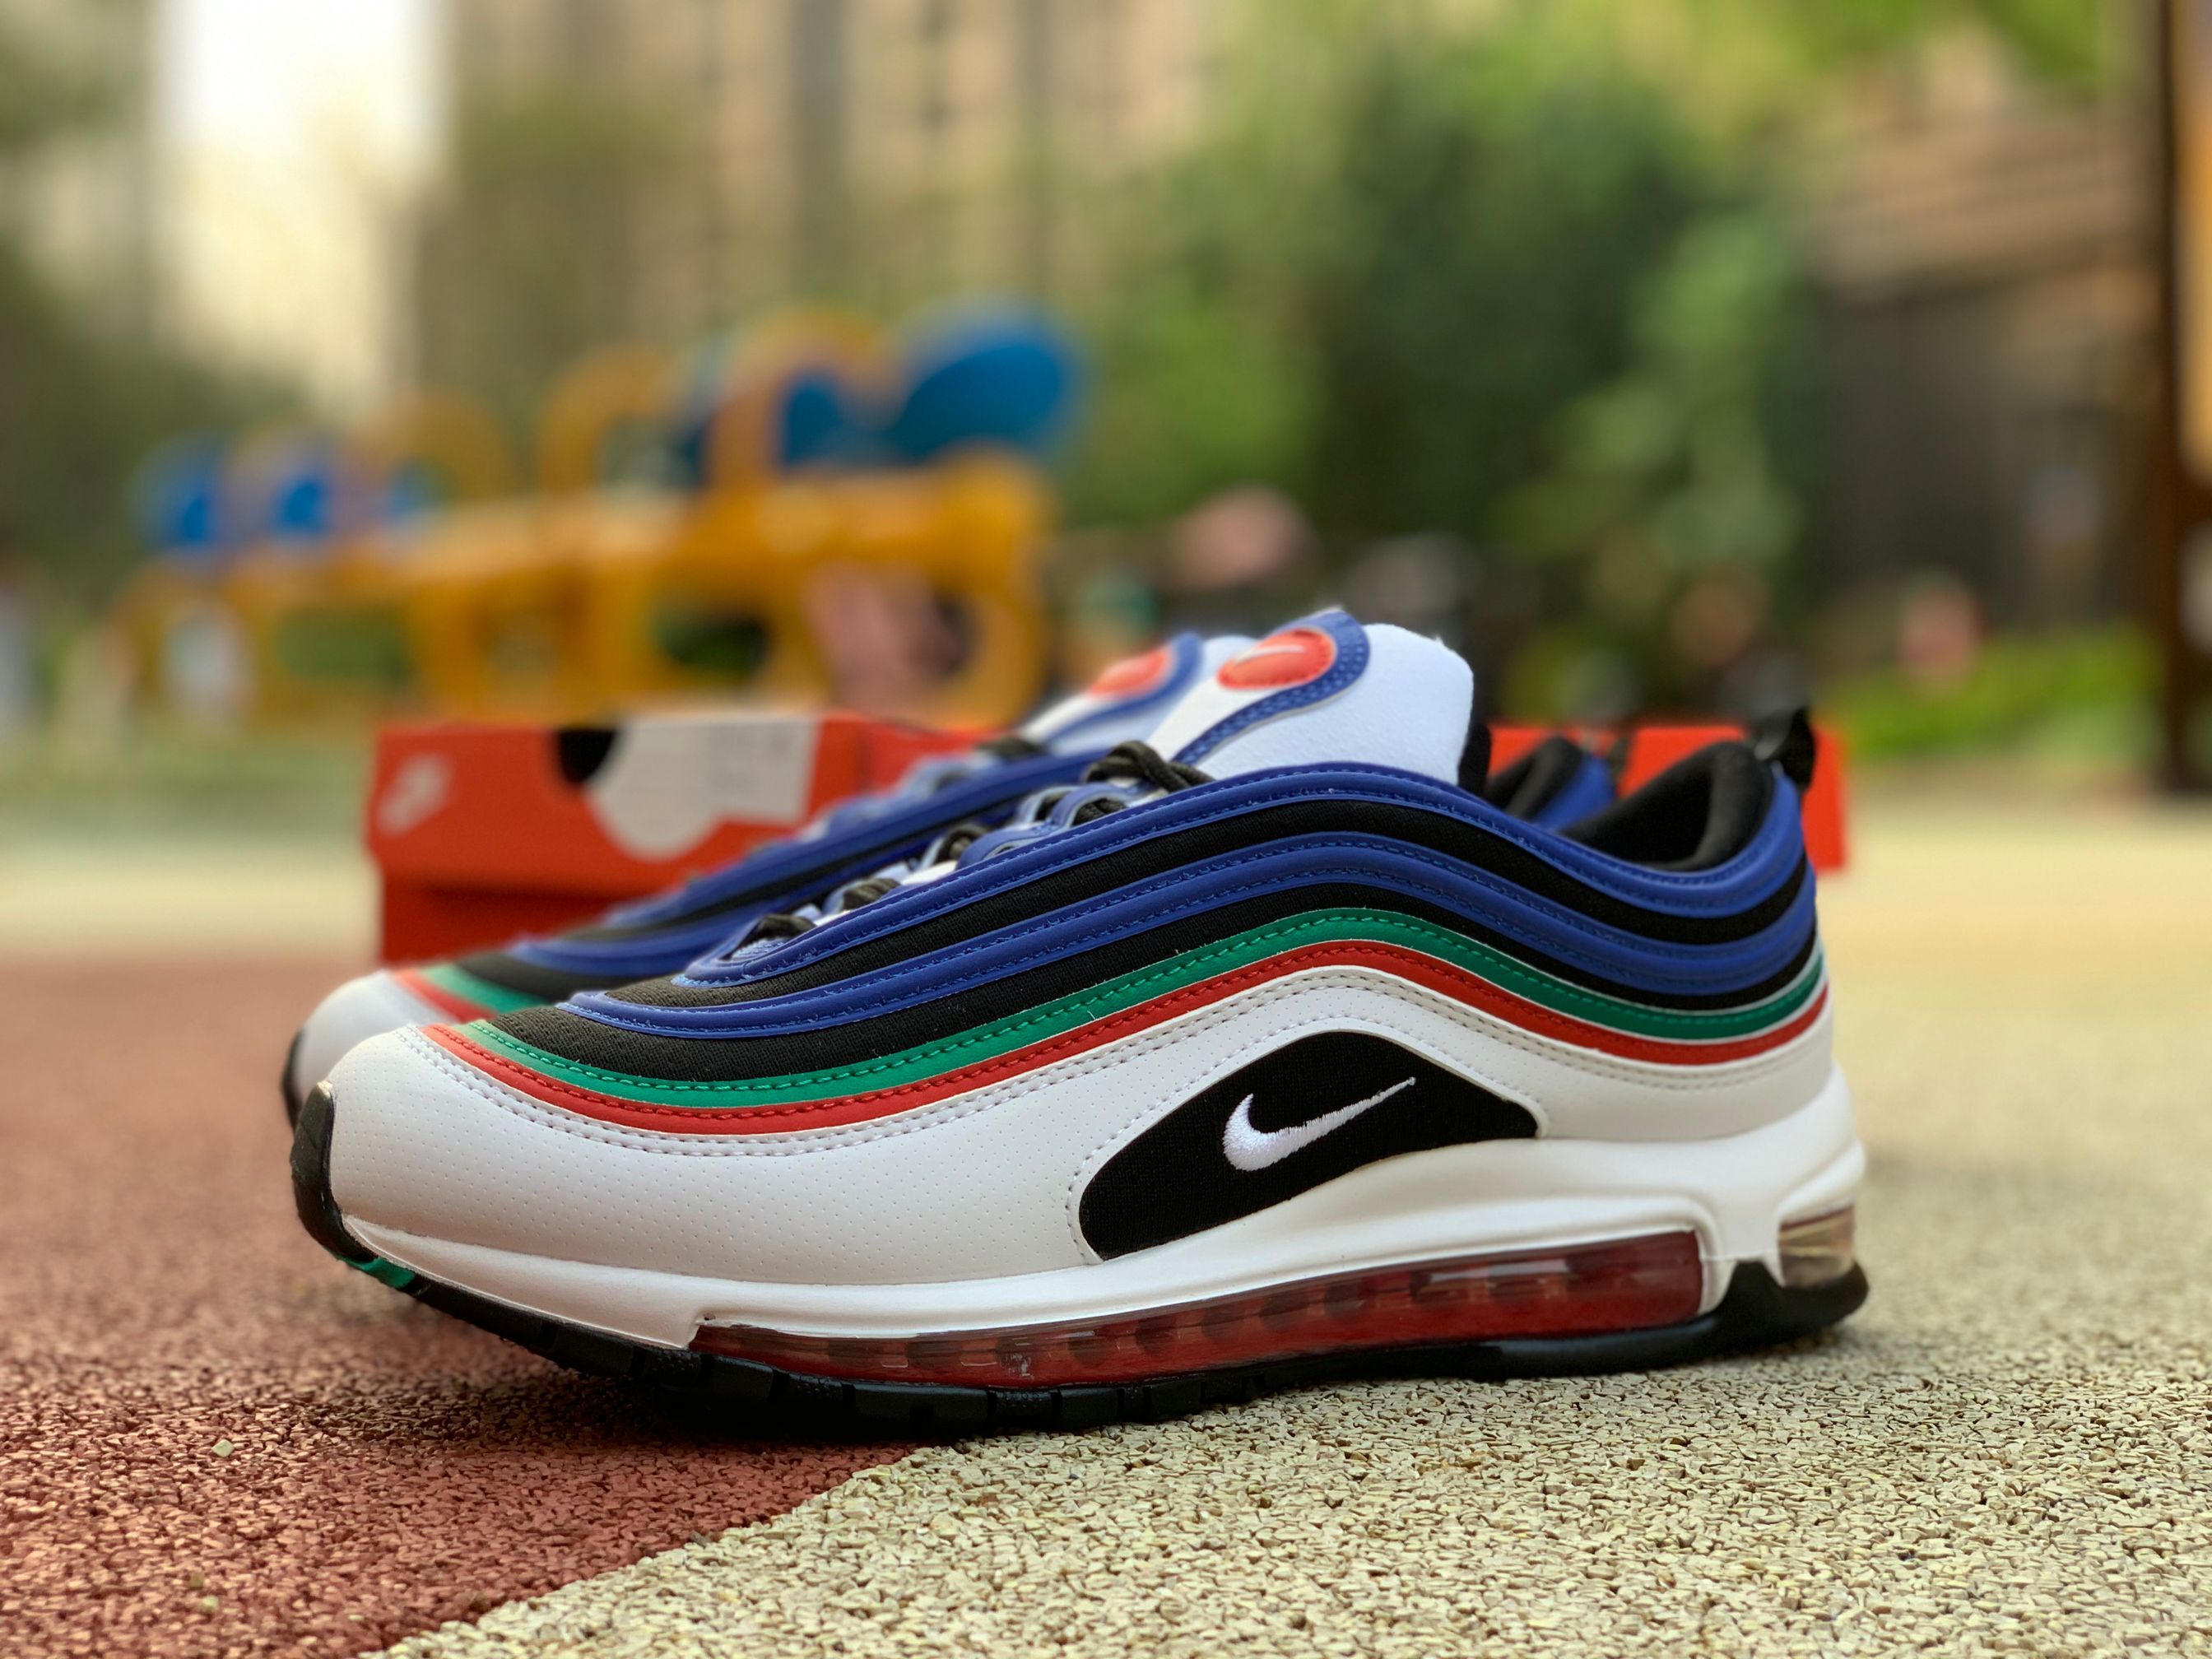 latest-release-nike-air-max-97-running-shoes-white-multi-color-hyper